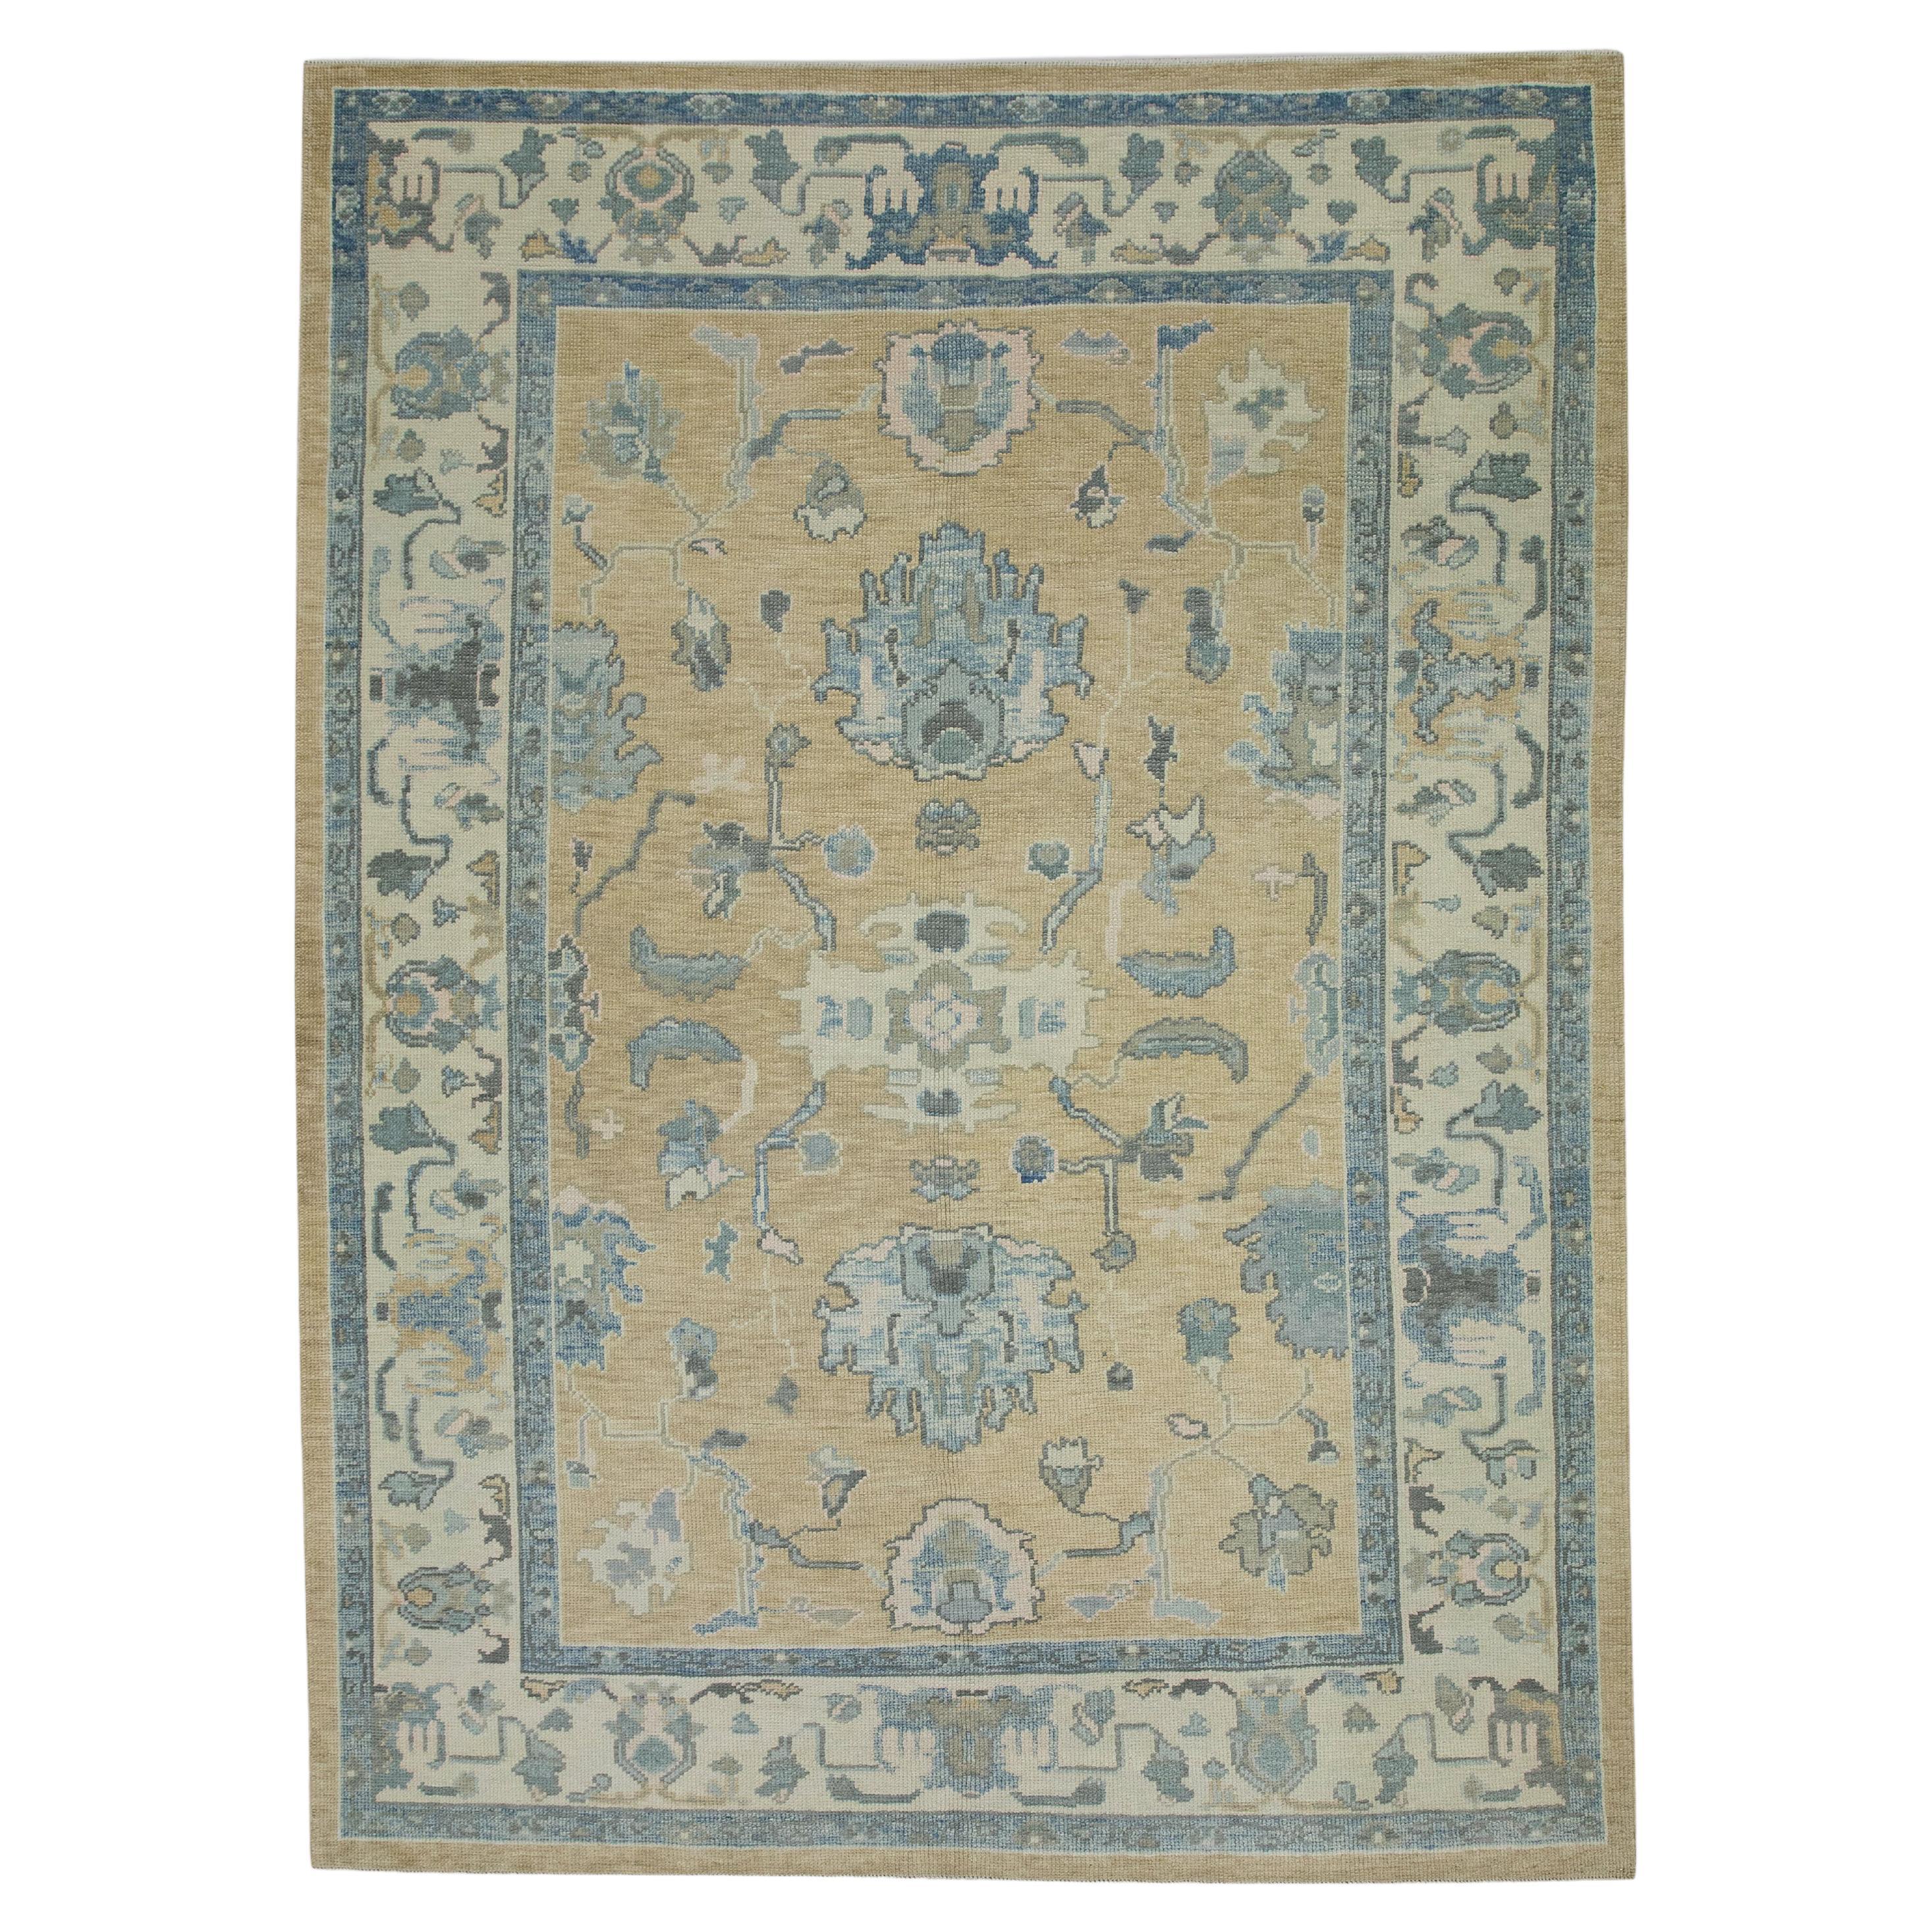 Yellow & Blue Floral Design Handwoven Wool Turkish Oushak Rug 6'1" x 8'3" For Sale